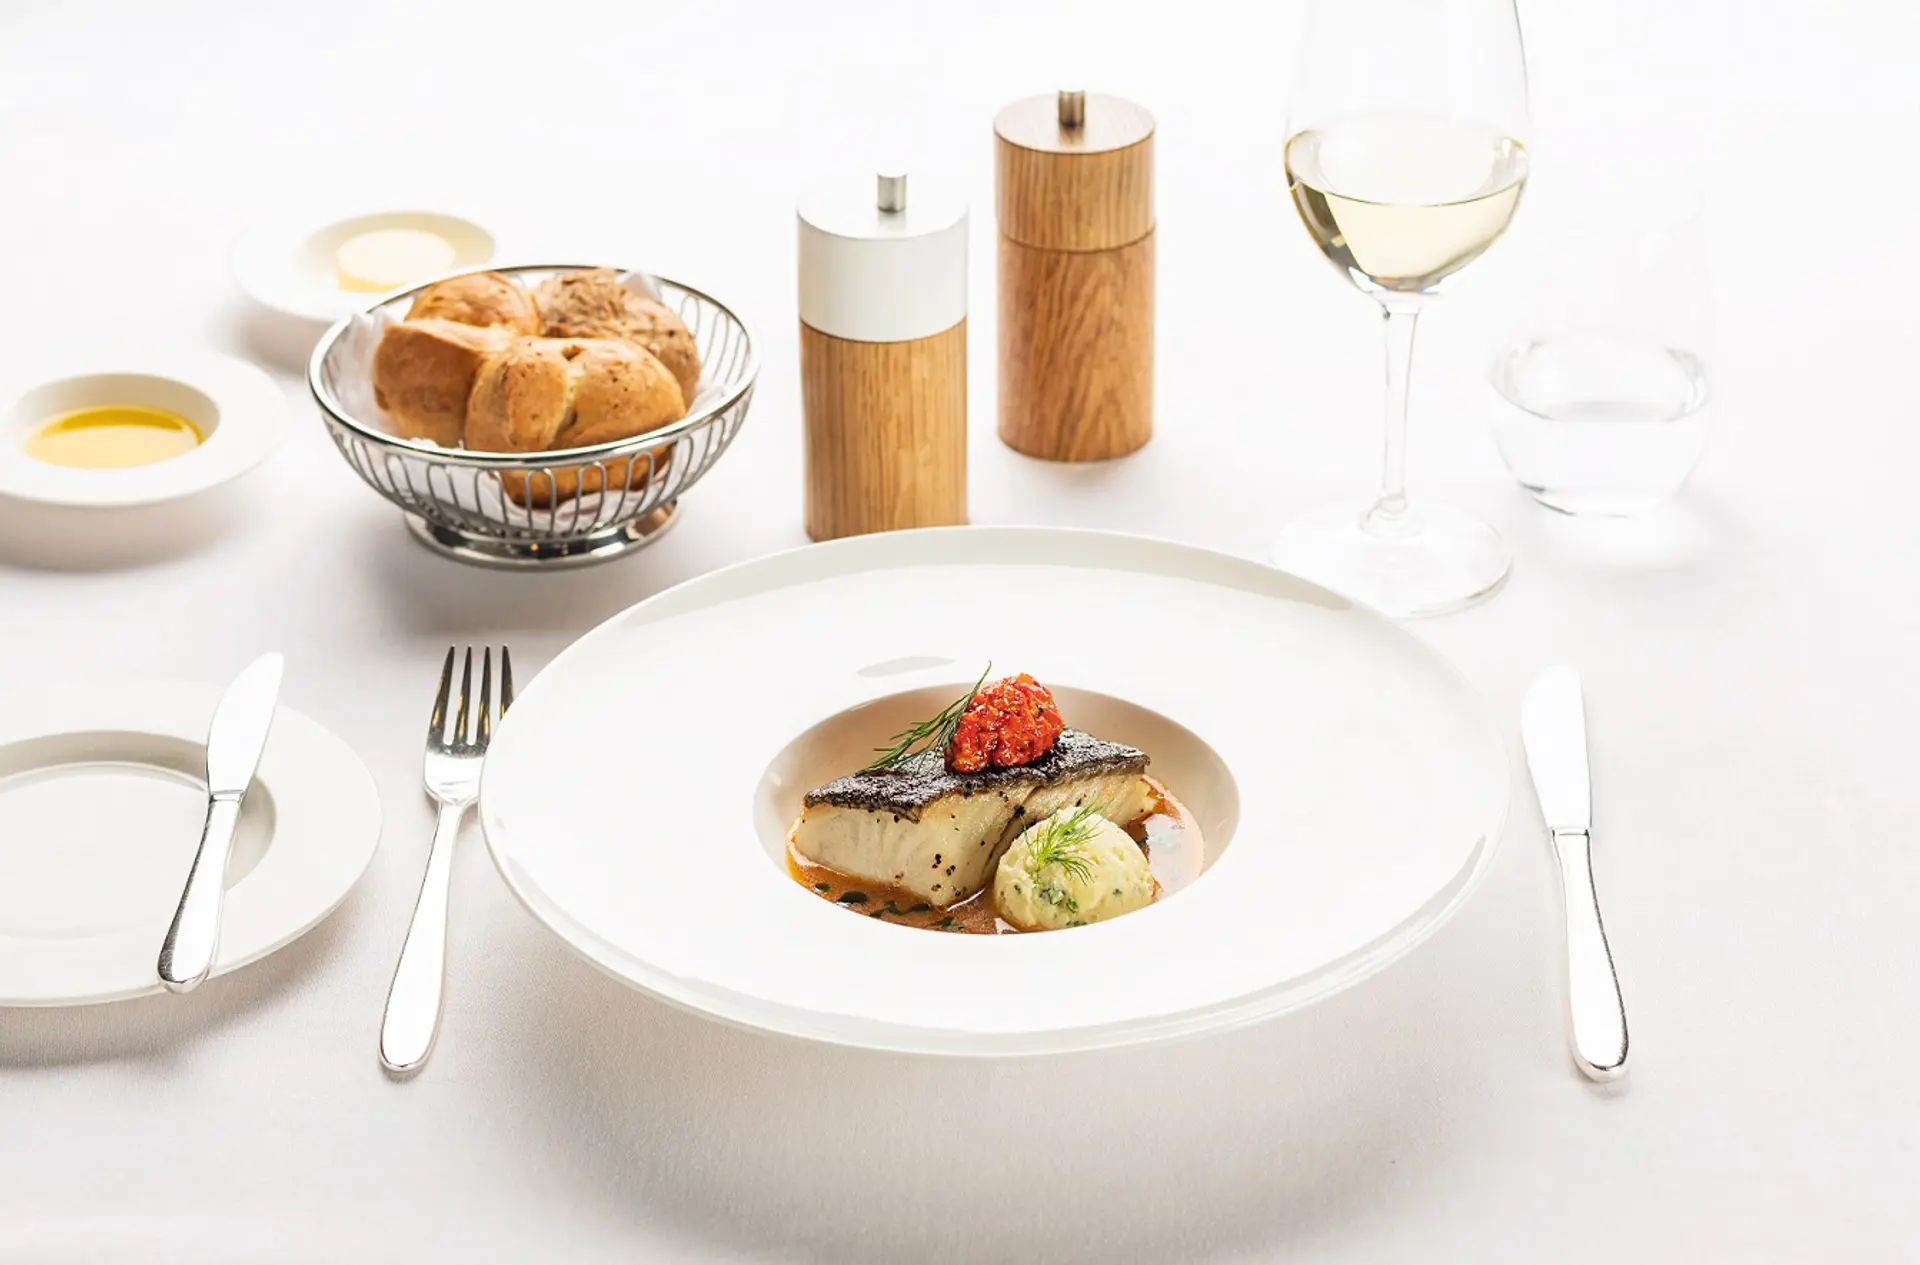 main_course_in_first_class_sauteeed_balck_cod_fillet_with_seafood_nage.jpg